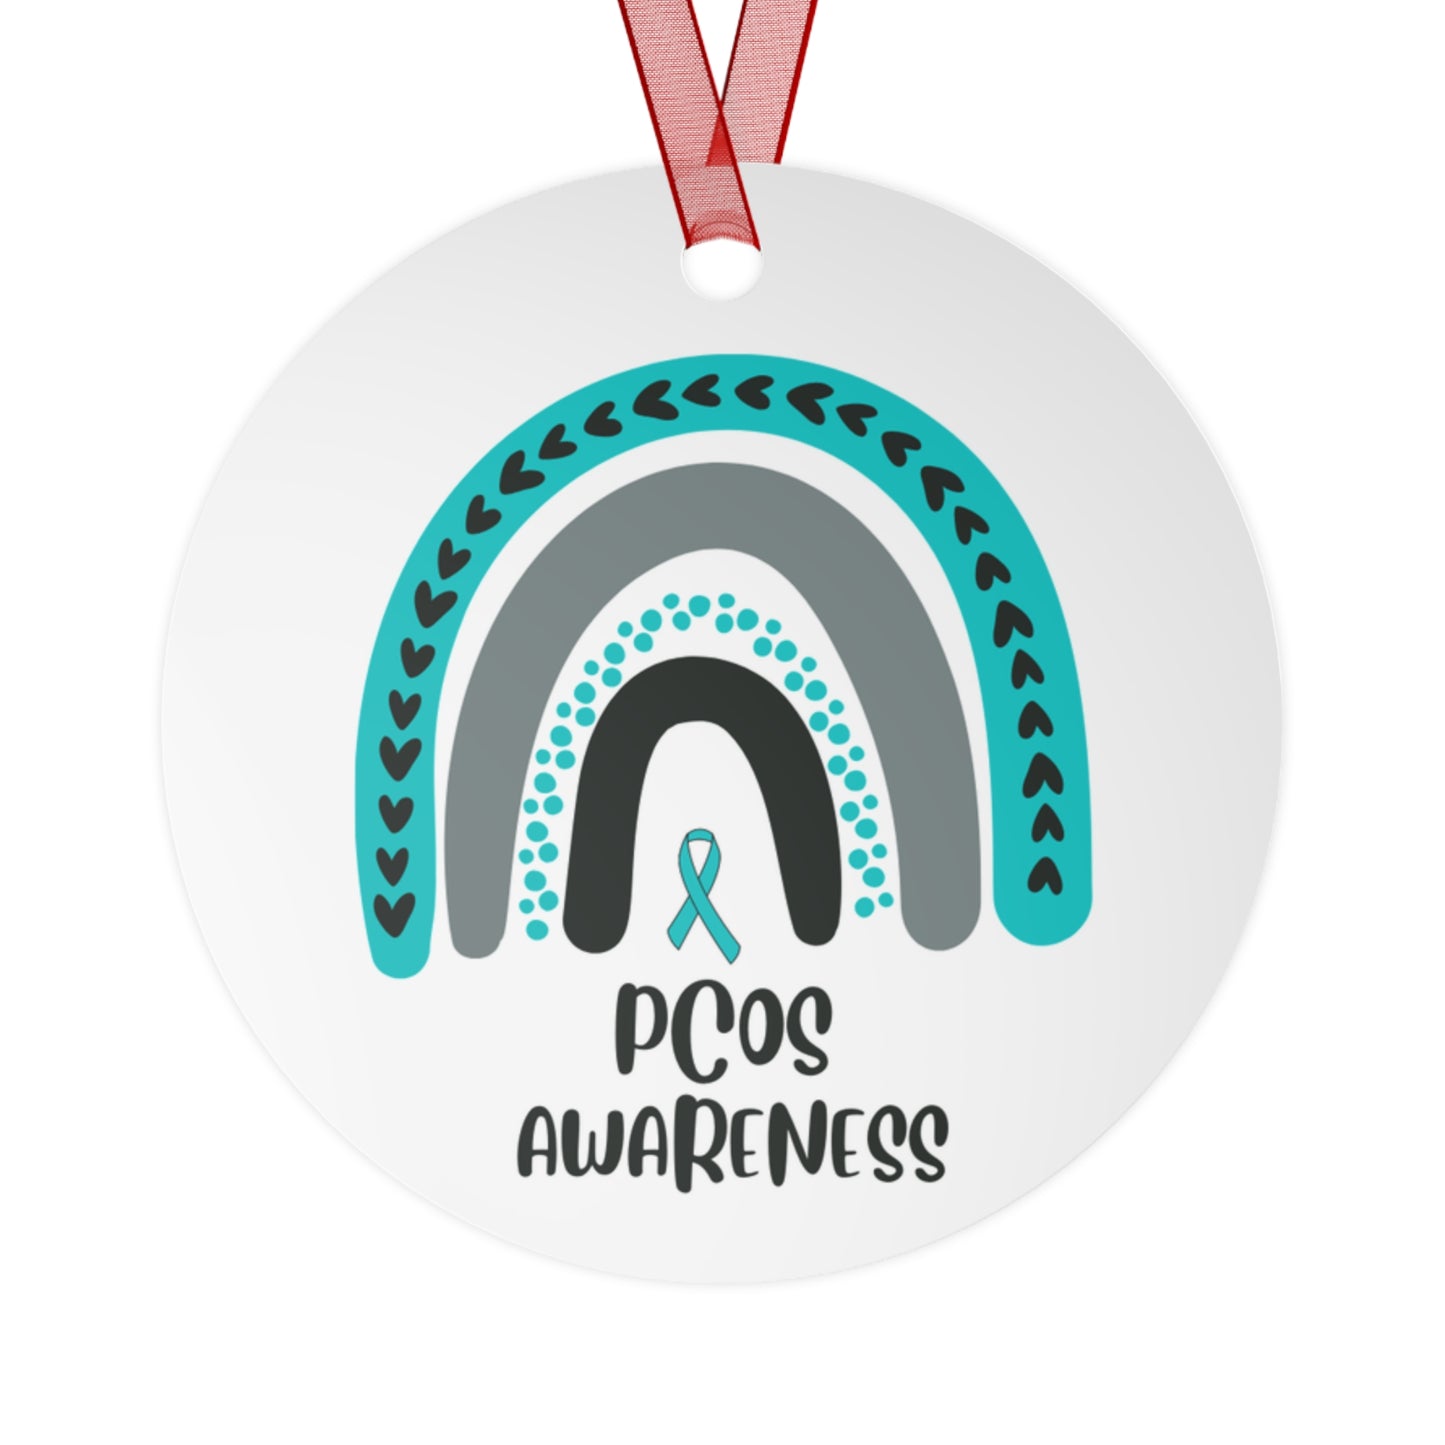 PCOS Awareness Christmas Ornament Stocking Stuffer Christmas Gift, Holiday Home Decor, Wall Hanging, Support for Friend